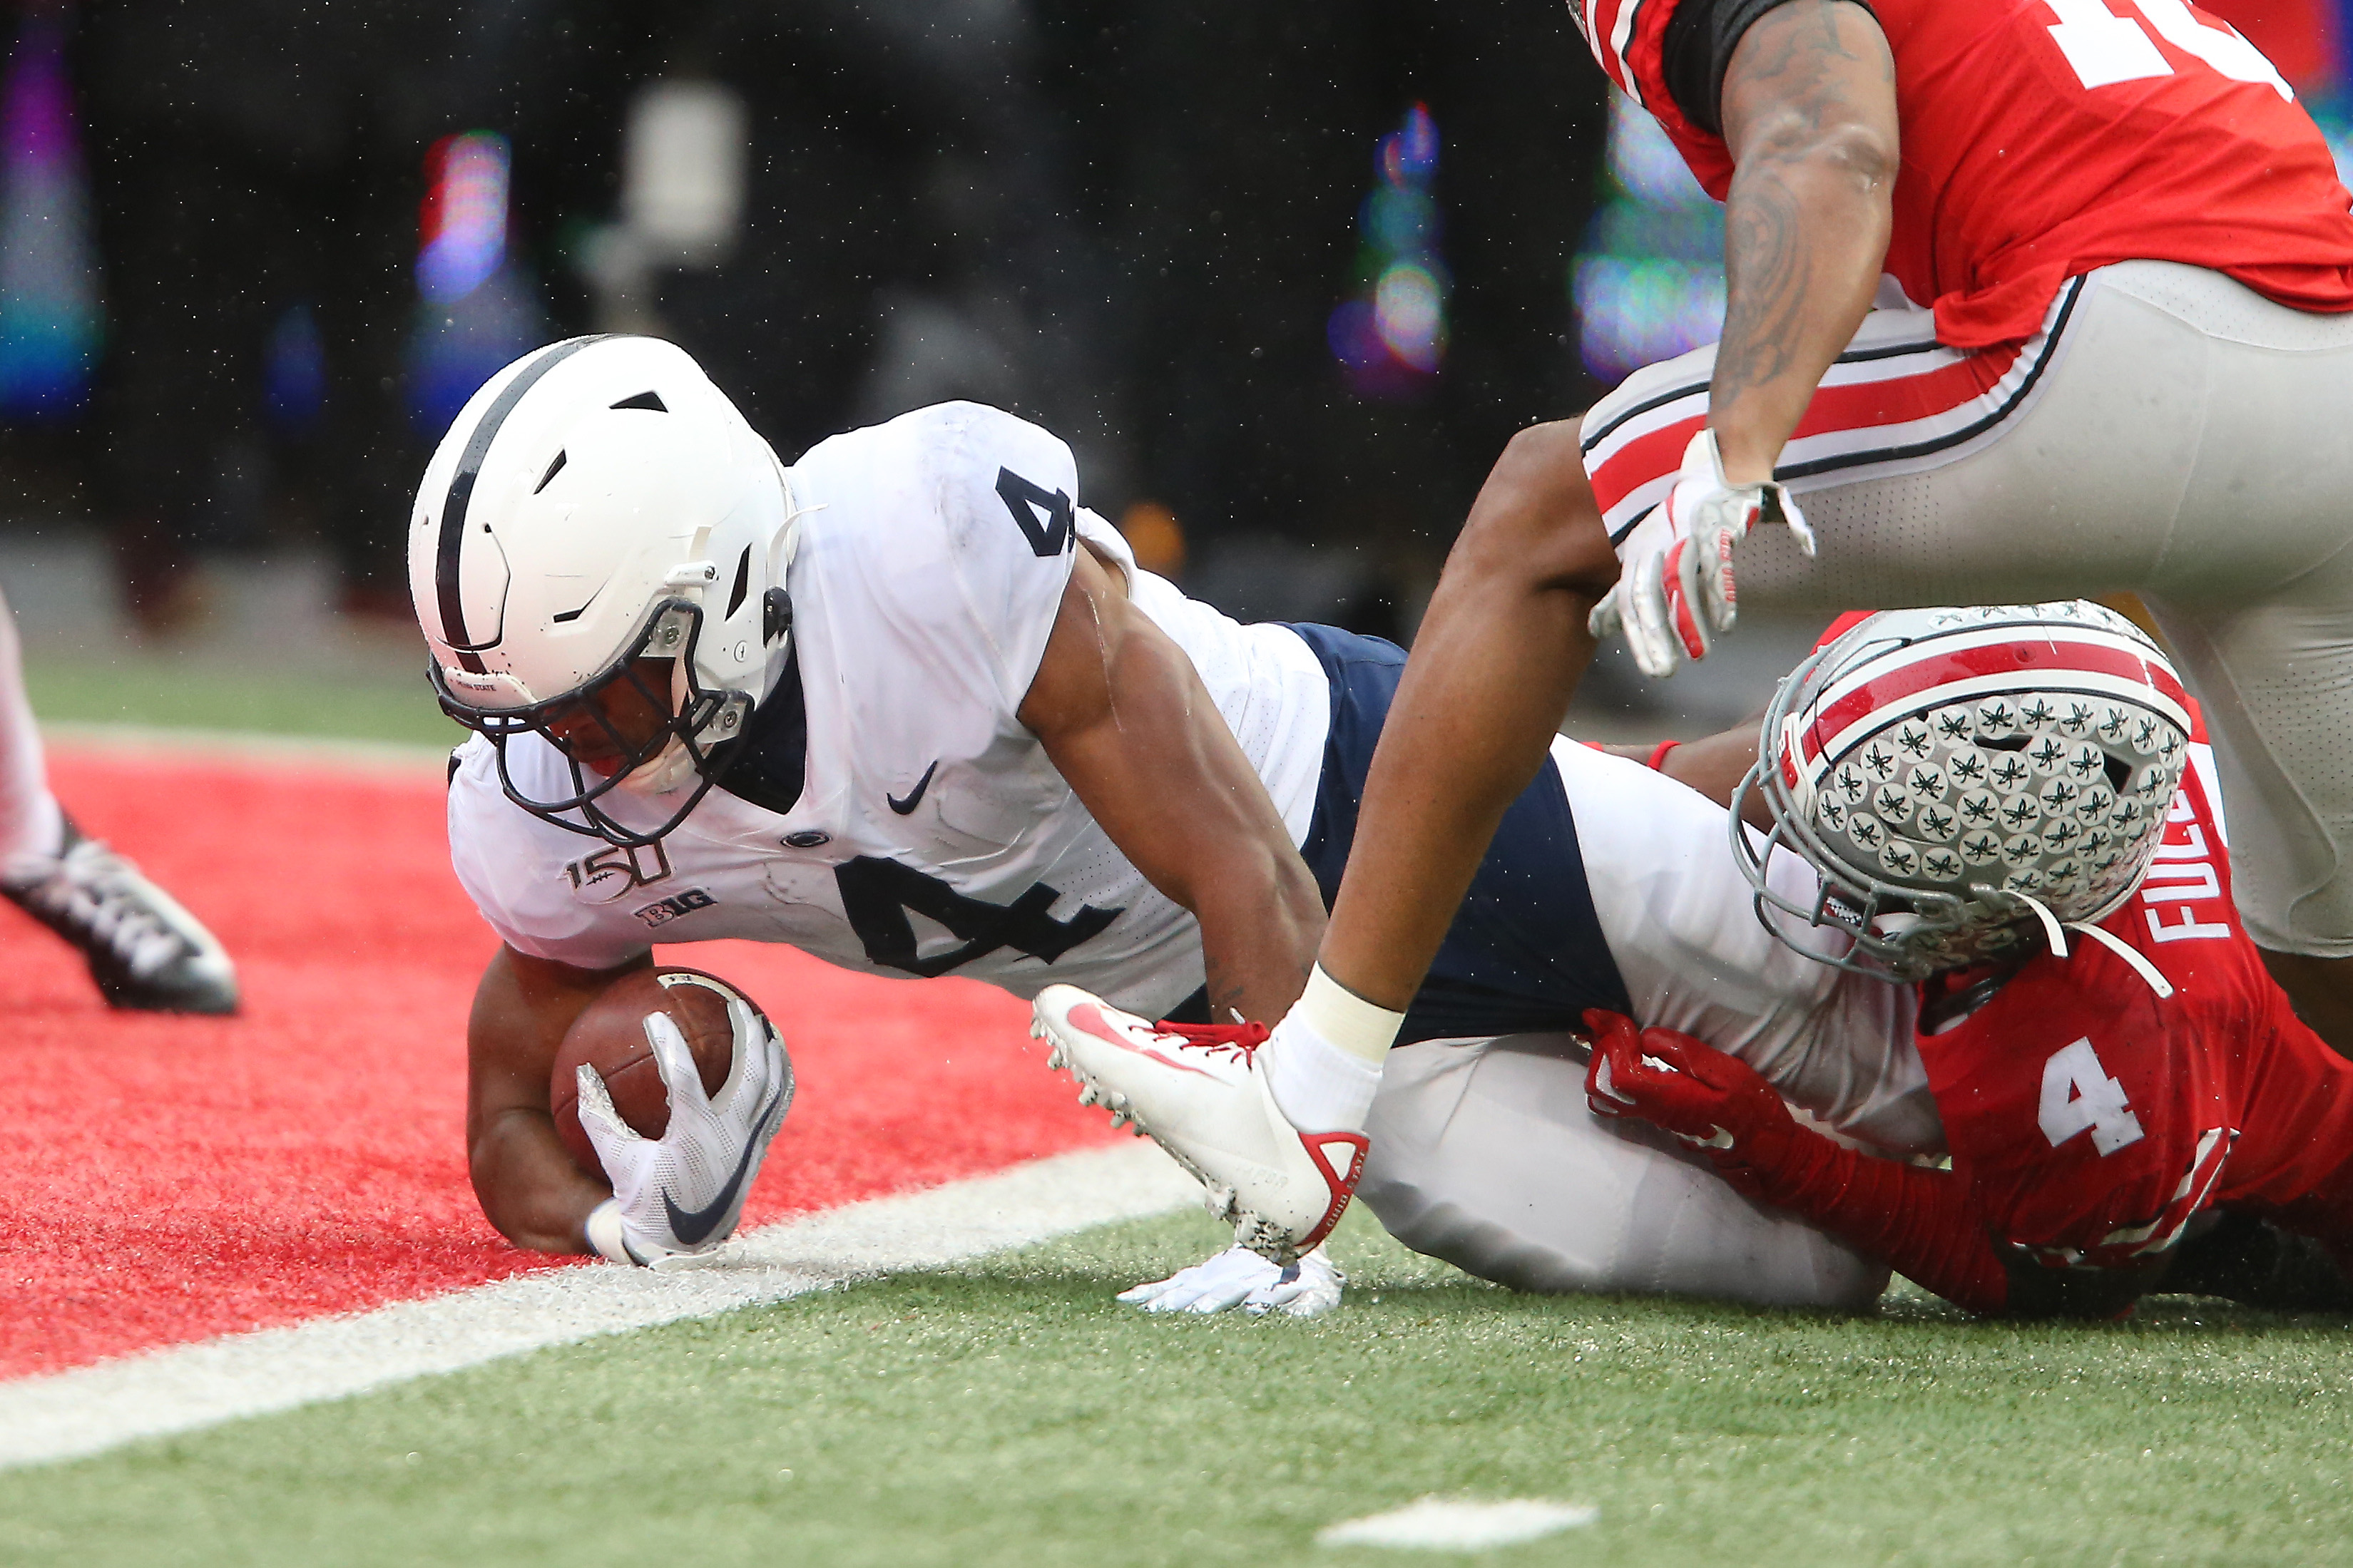 Podcast: Reacting to Penn State's 28-17 loss at Ohio State